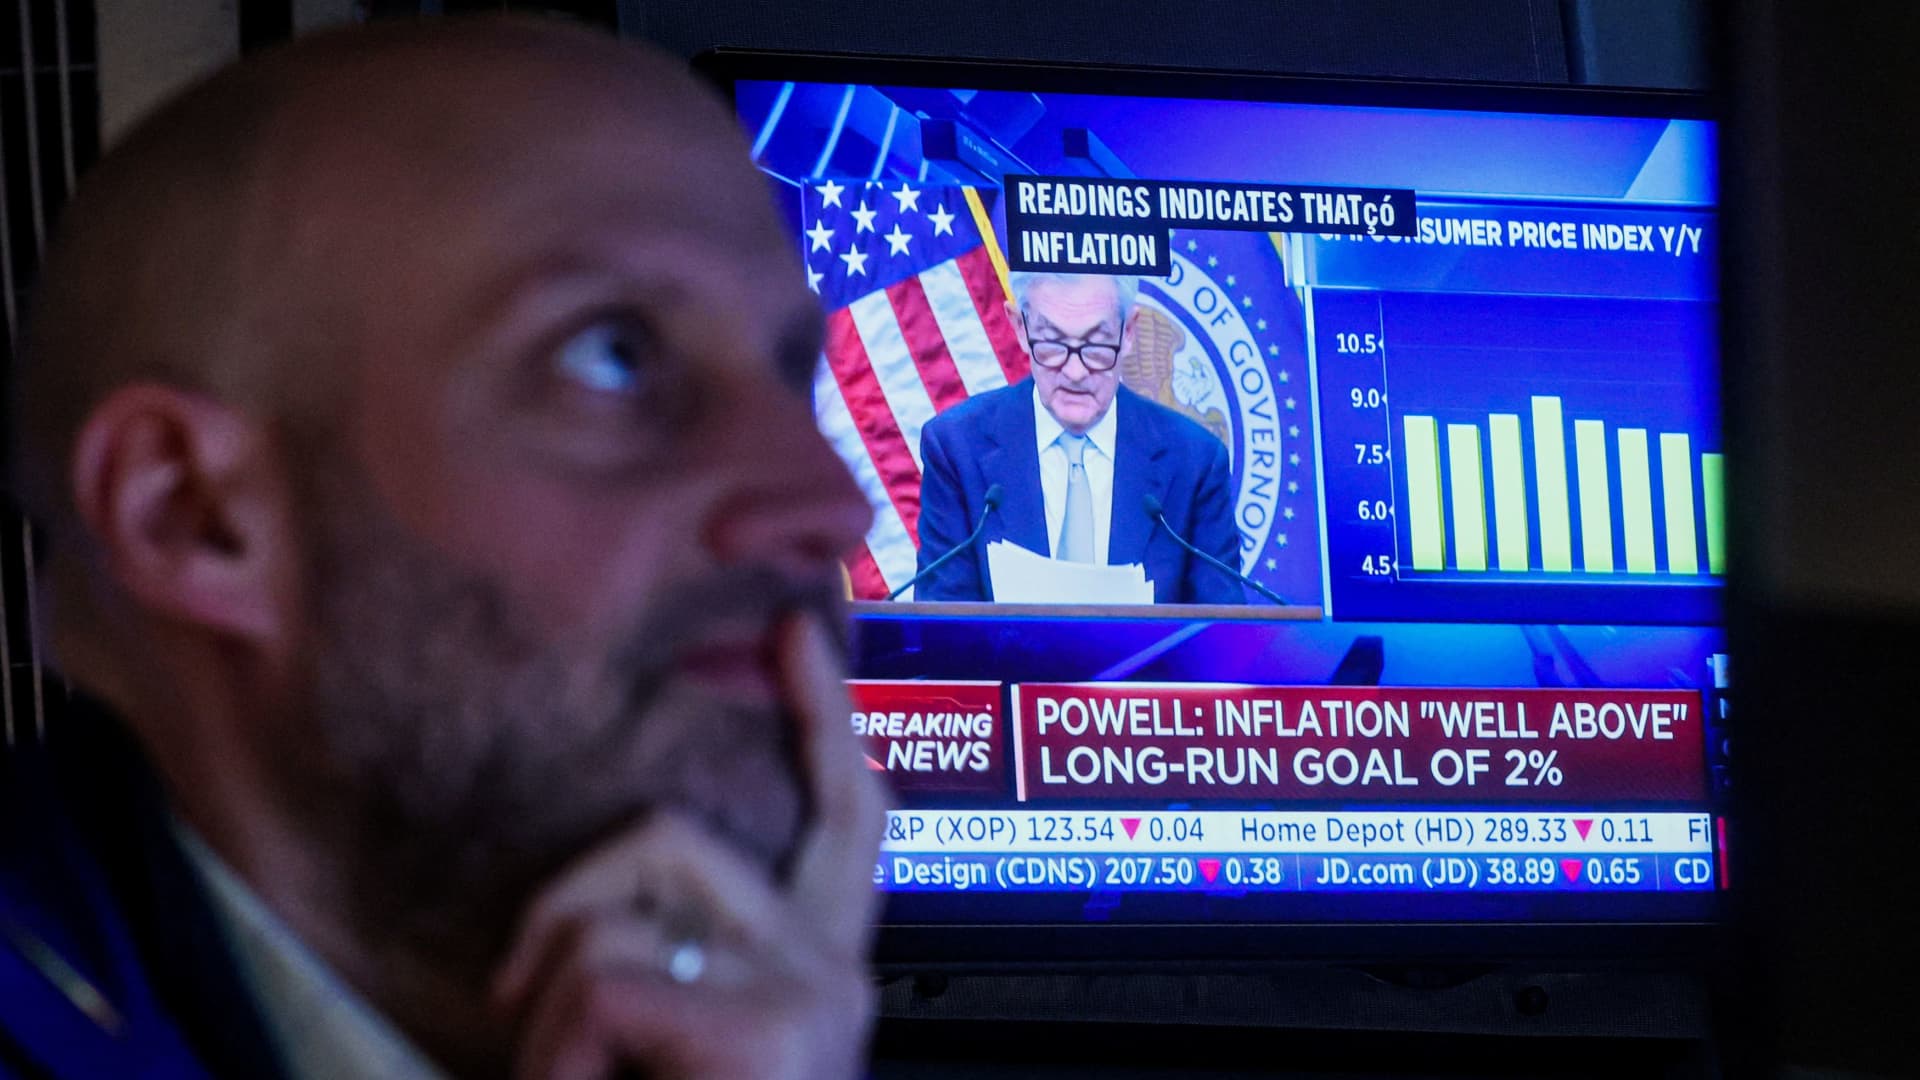 Markets saw a dovish Fed rate hike, but Powell’s warning on credit conditions spooked investors